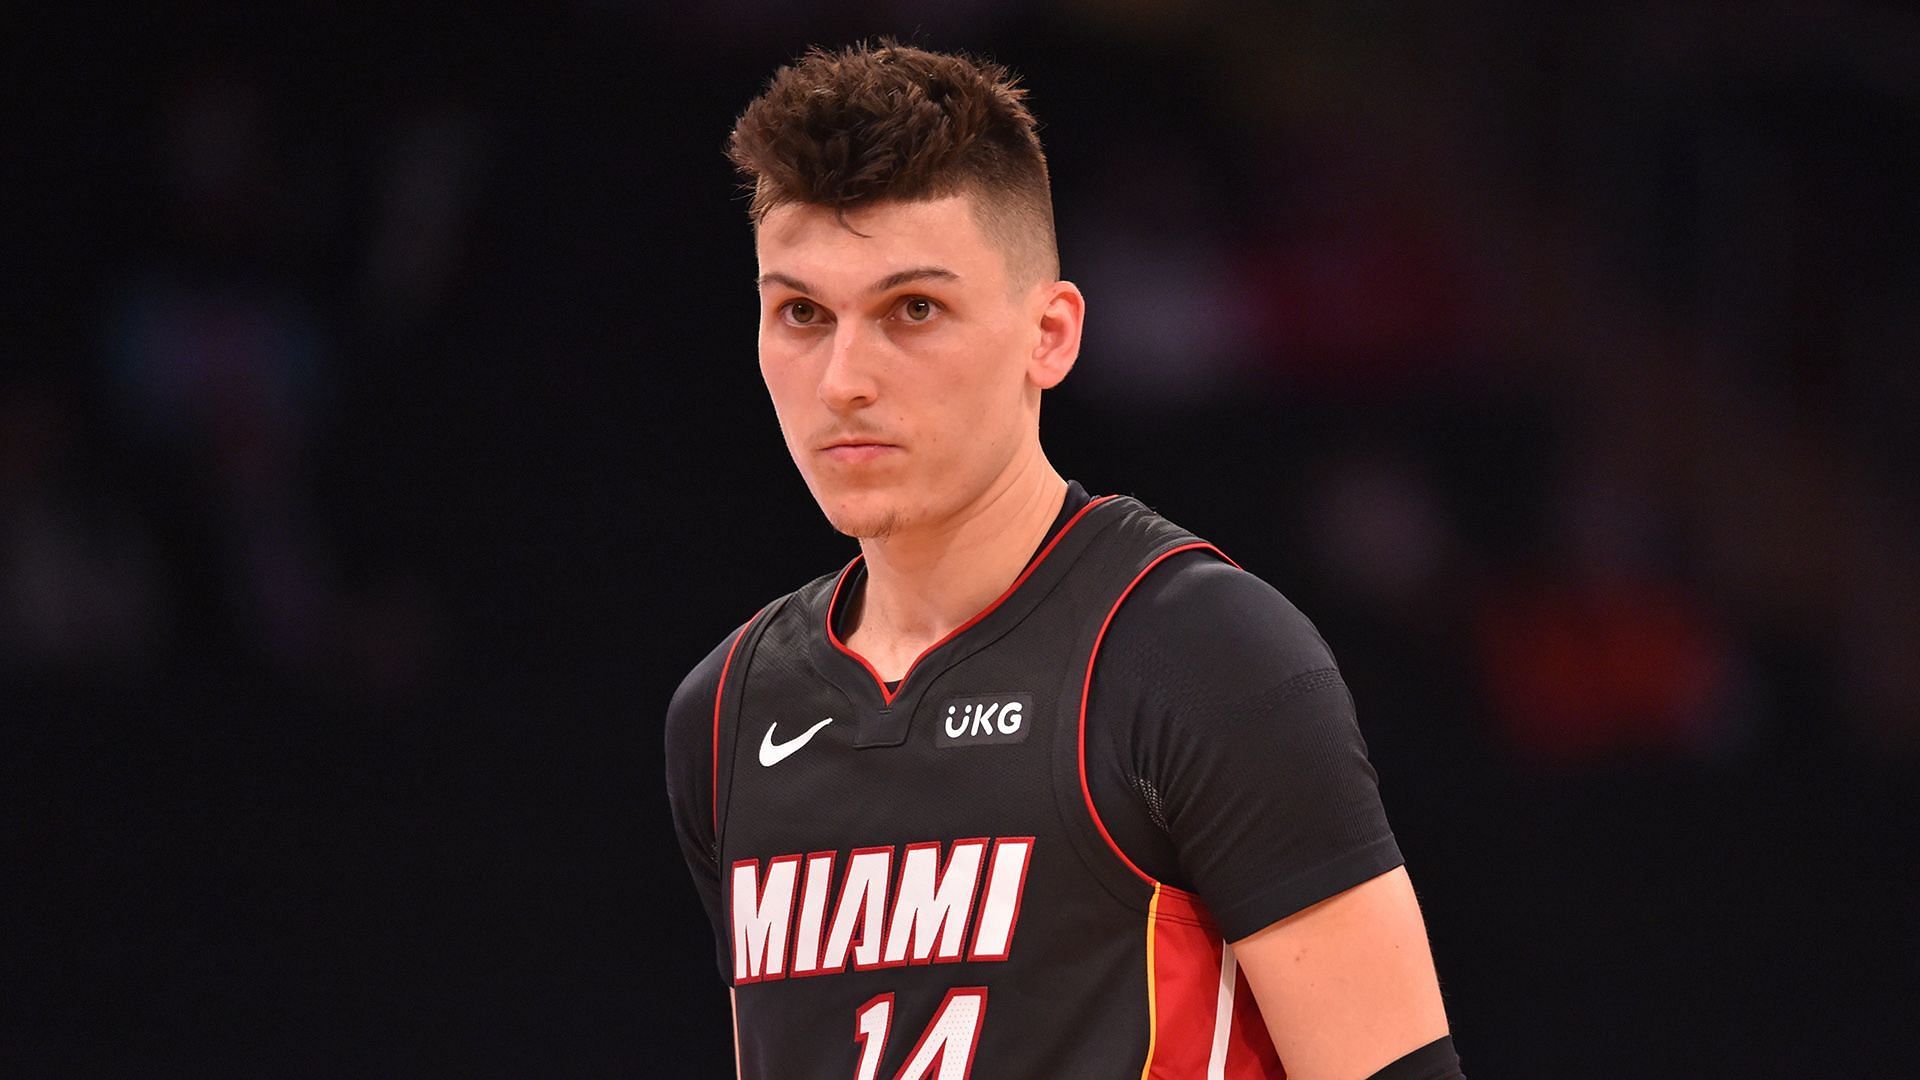 Miami Heat guard Tyler Herro continues to make his case for Most Improved Player award.